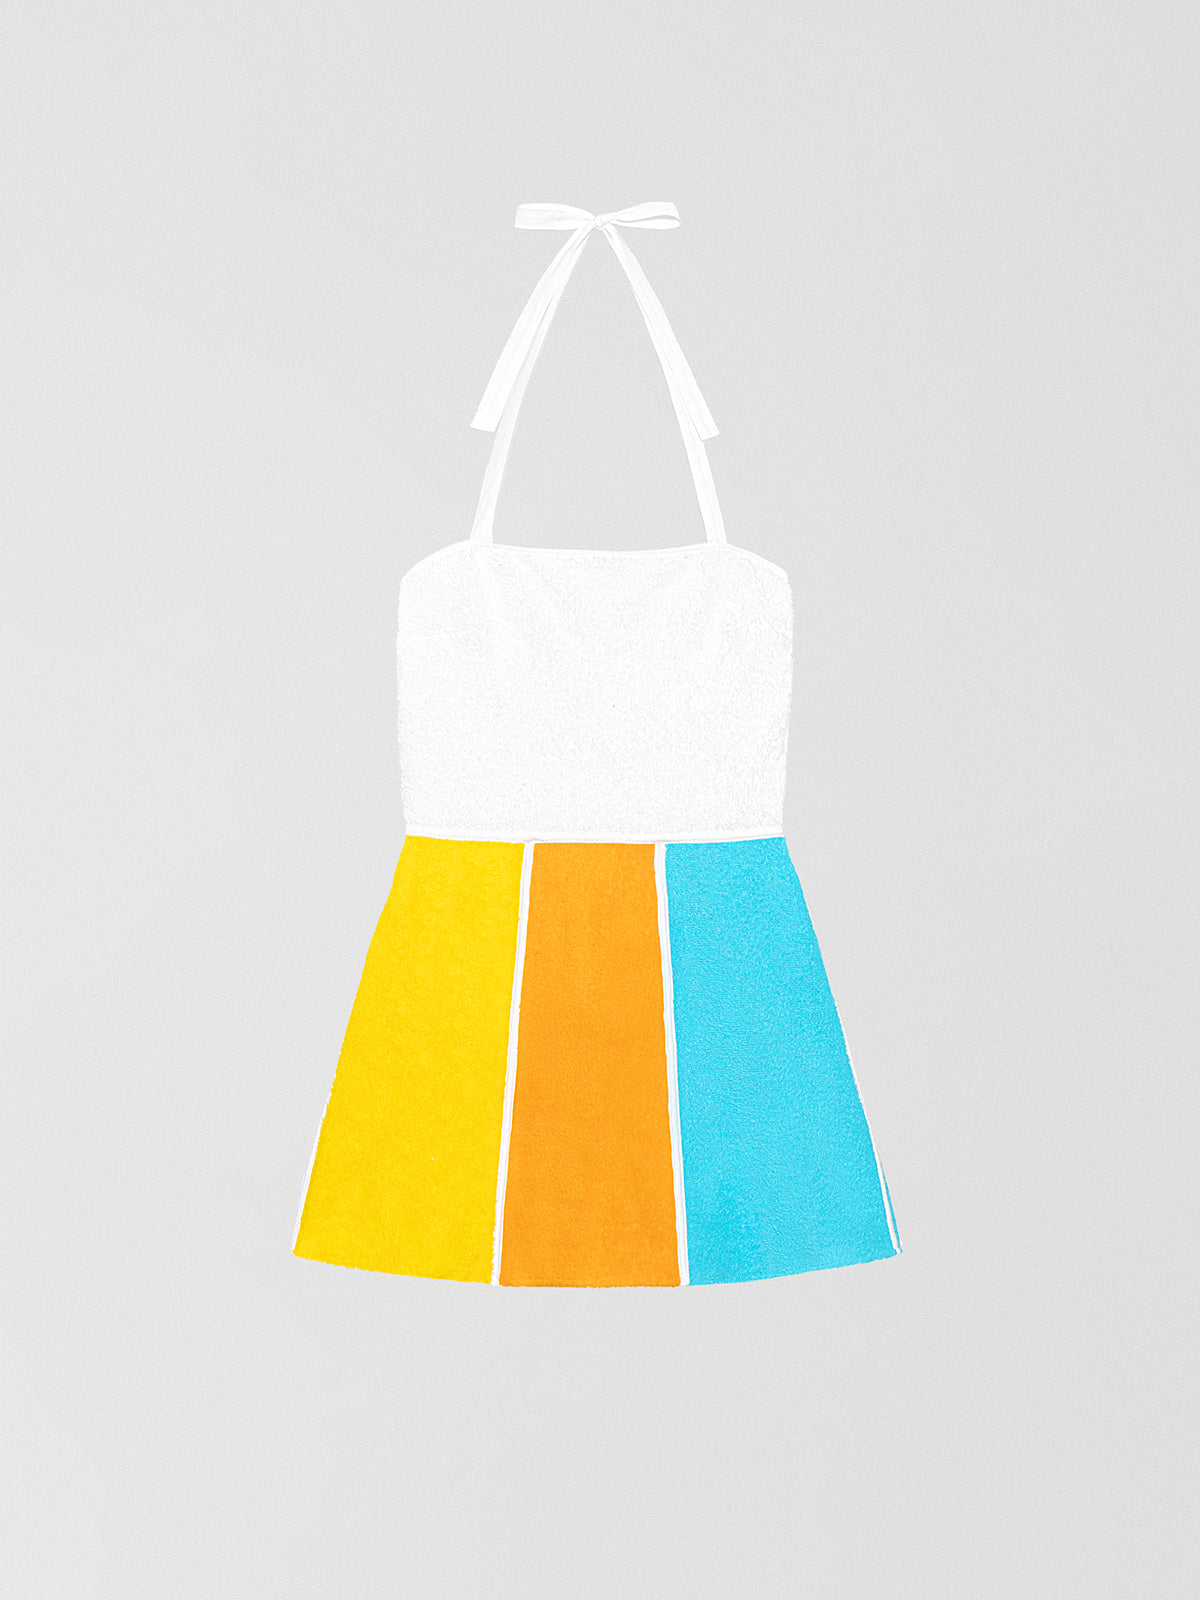 Colour: Multicolour.   Short towel dress made in white, yellow, orange and turquoise cotton.   Regular fit. Short length. Flared skirt with orange, yellow and turquoise stripe. Square neckline with knotted bow at the neck.